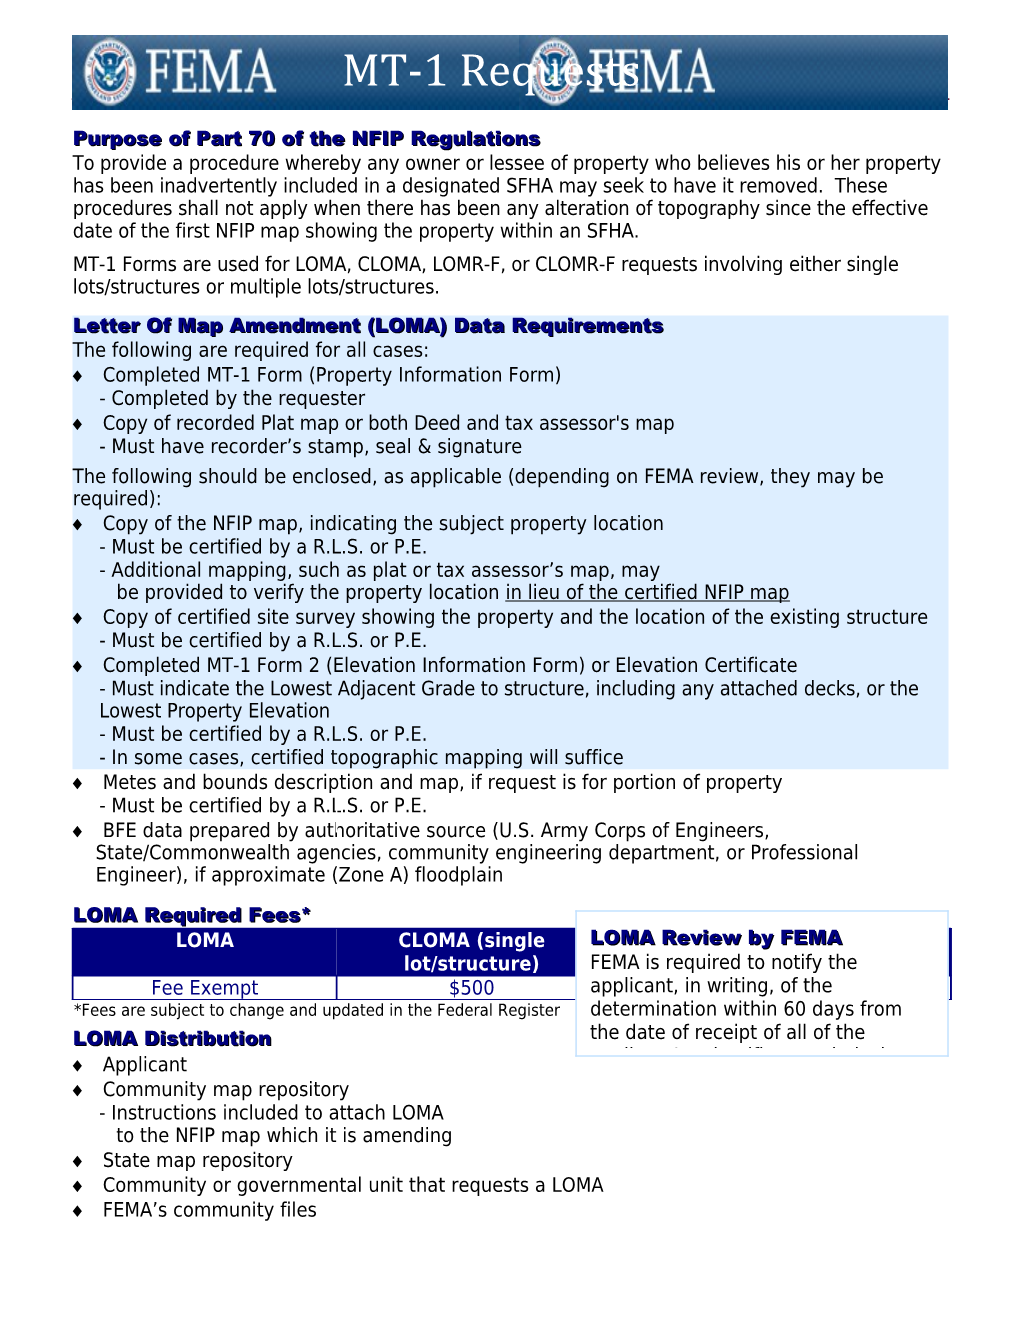 FEMA Letter of Map Change Submittal Requirements